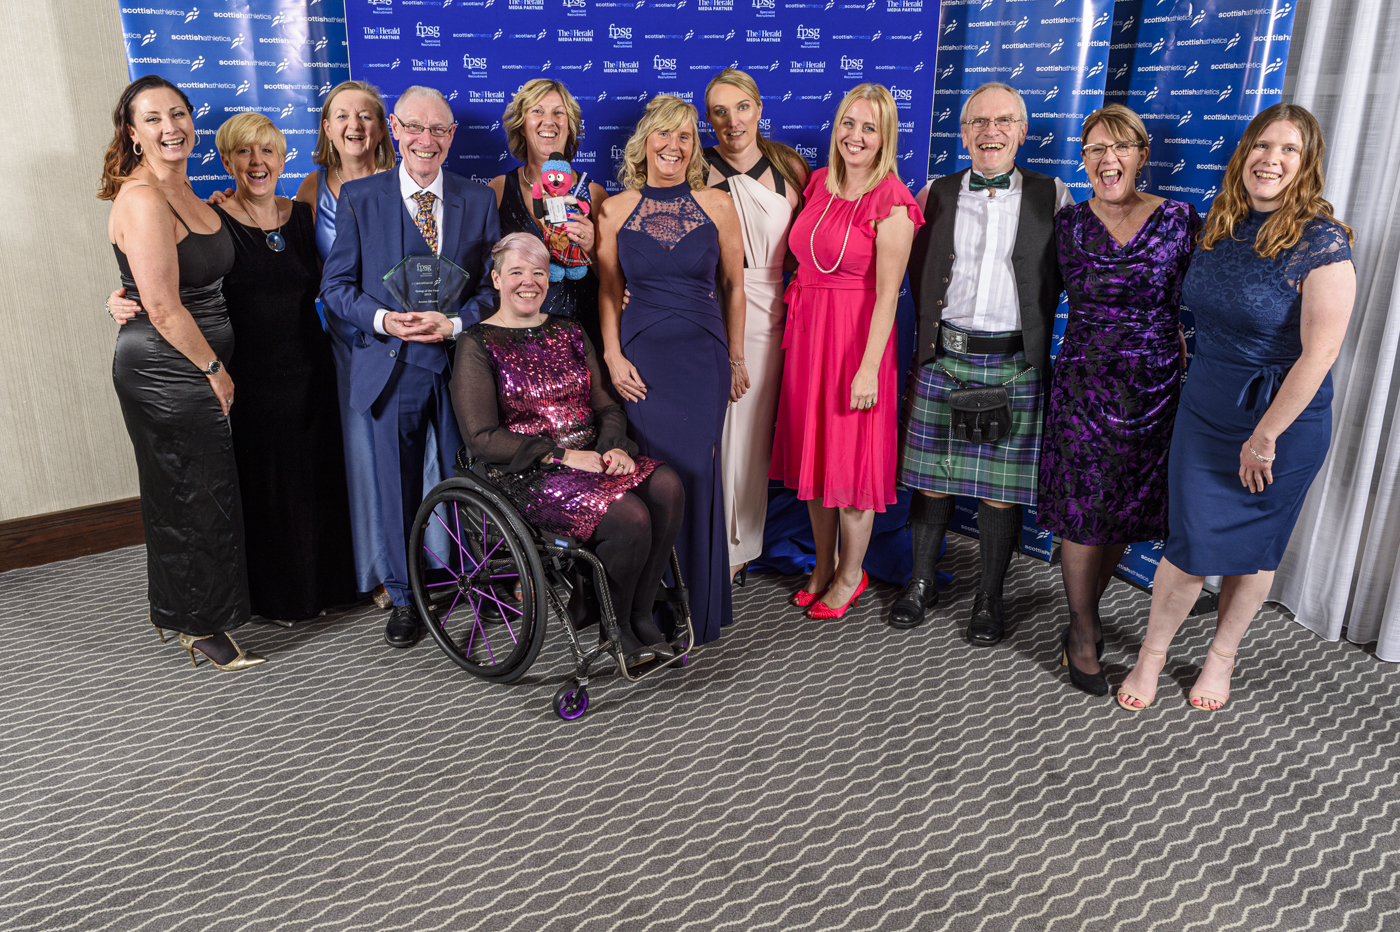 The Anster Allsorts pictured alongside some of the other winners.